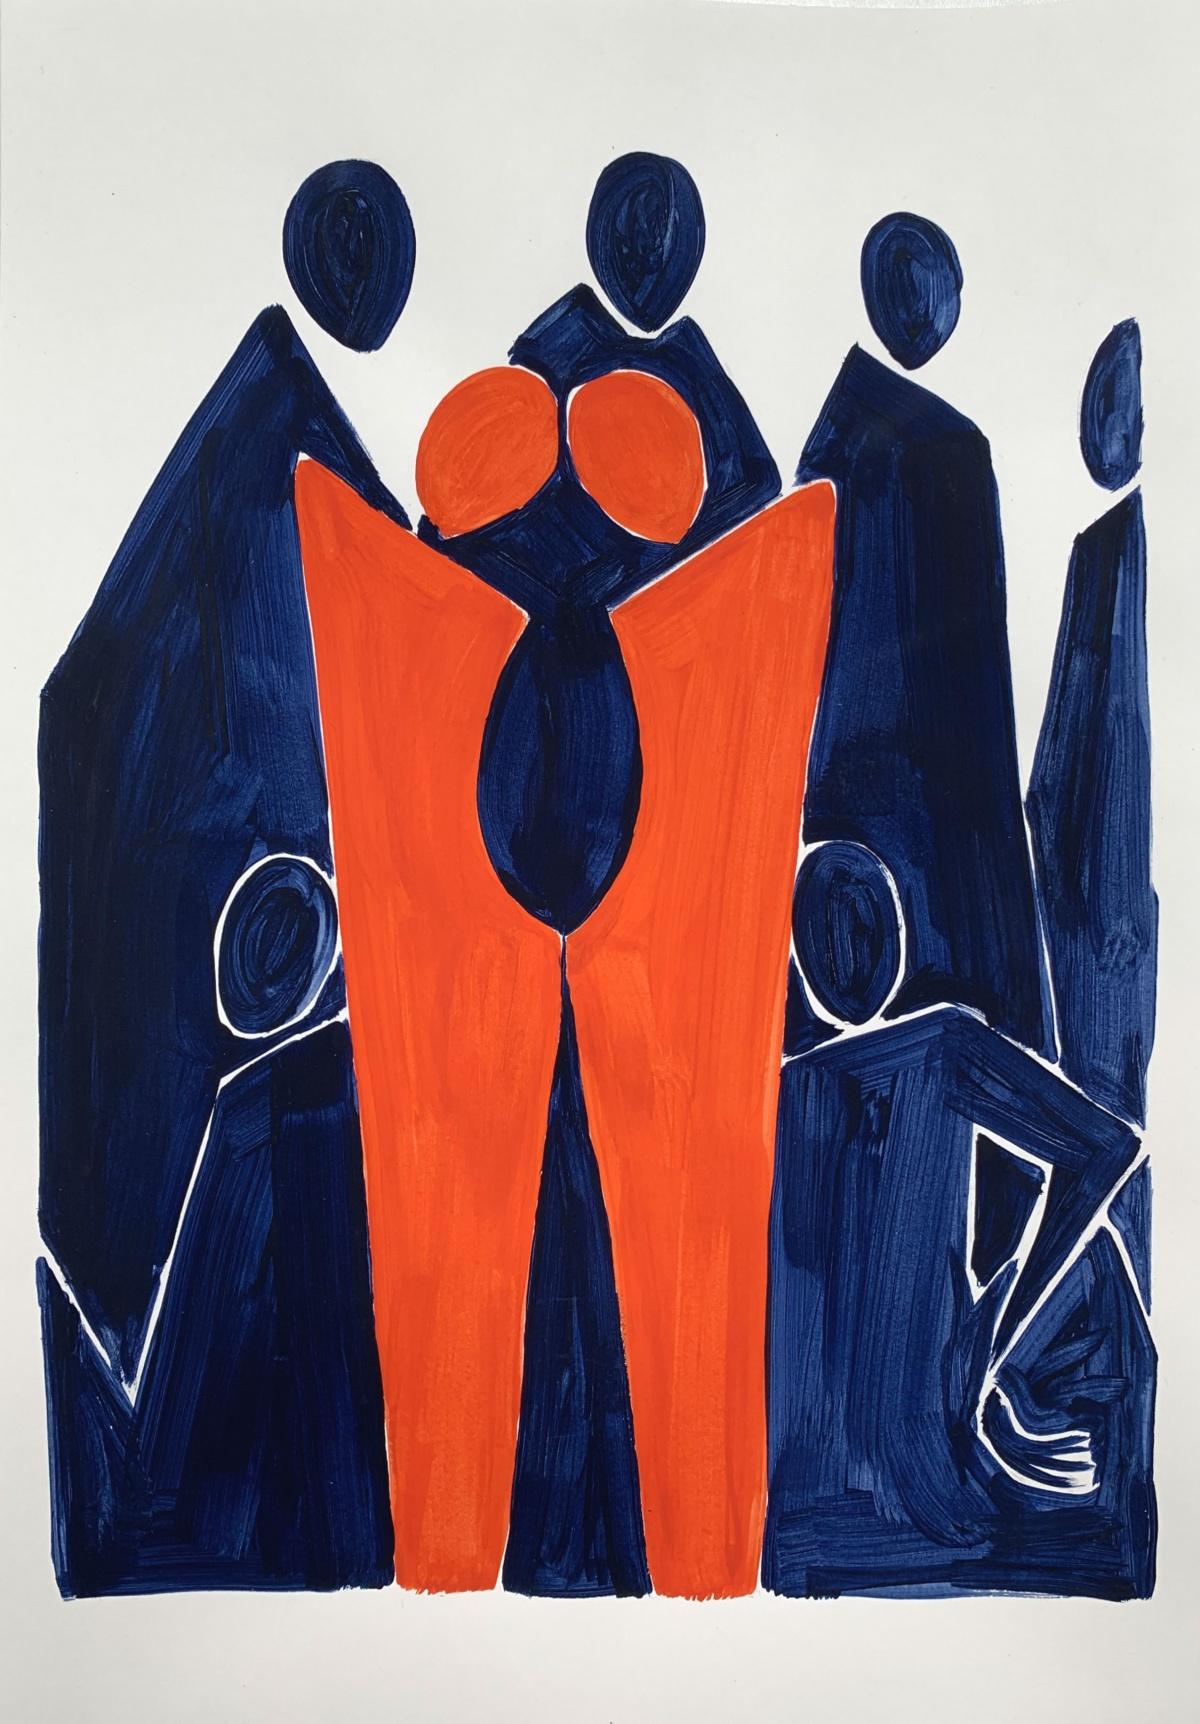 Twins. Figurative Painting on Paper, Young art, Vibrant, European art For Sale 2